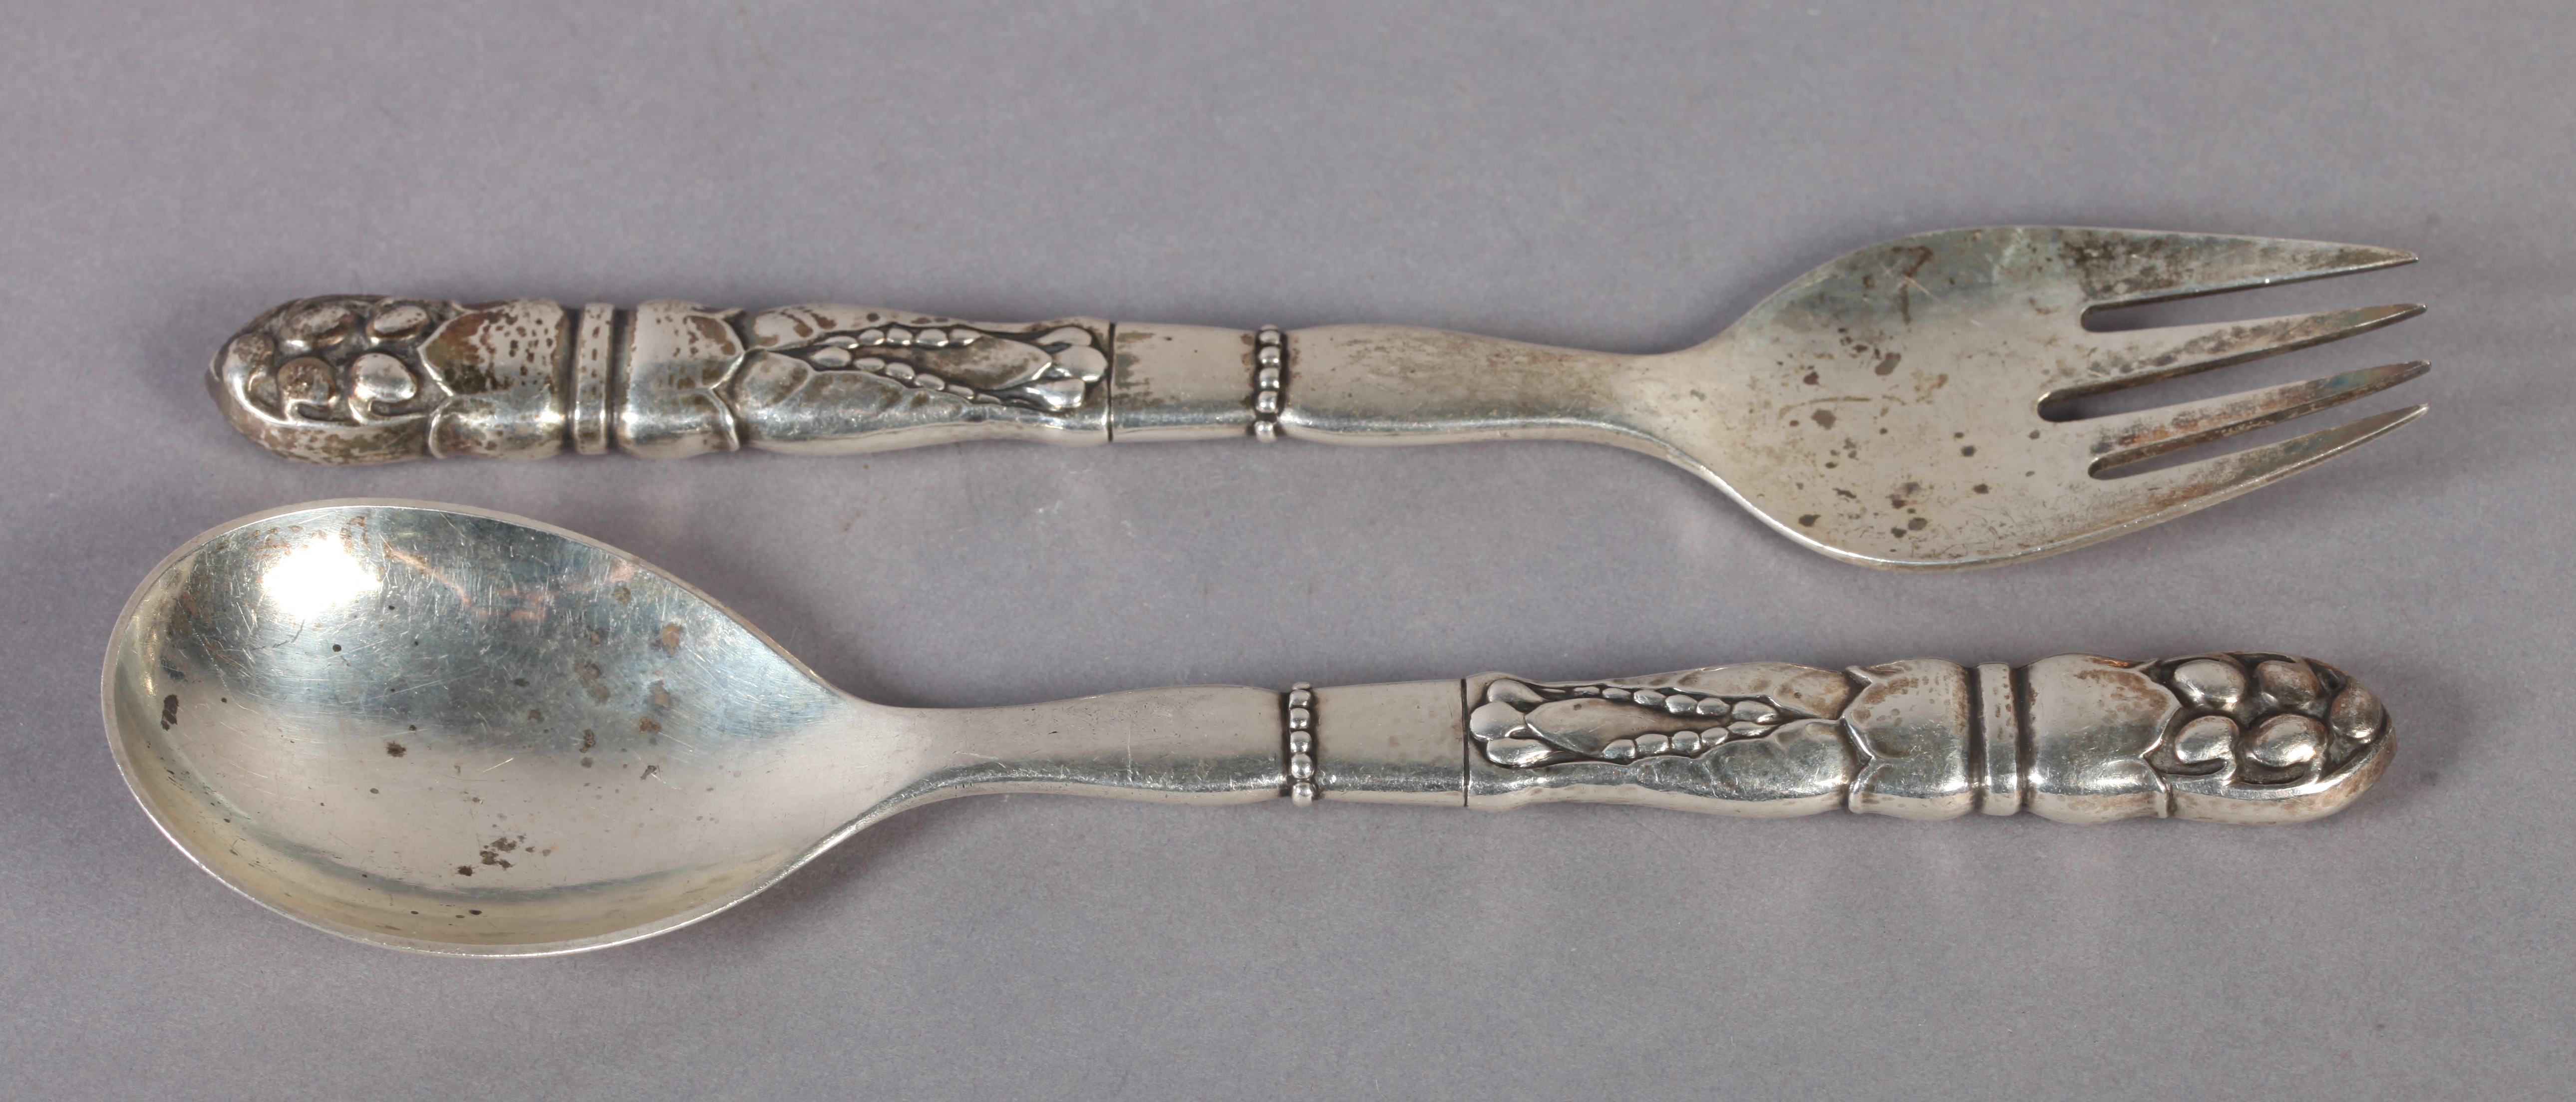 GEORG JENSEN, DENMARK, a pair of .925 Sterling silver salad servers, the handles cast with seed pods